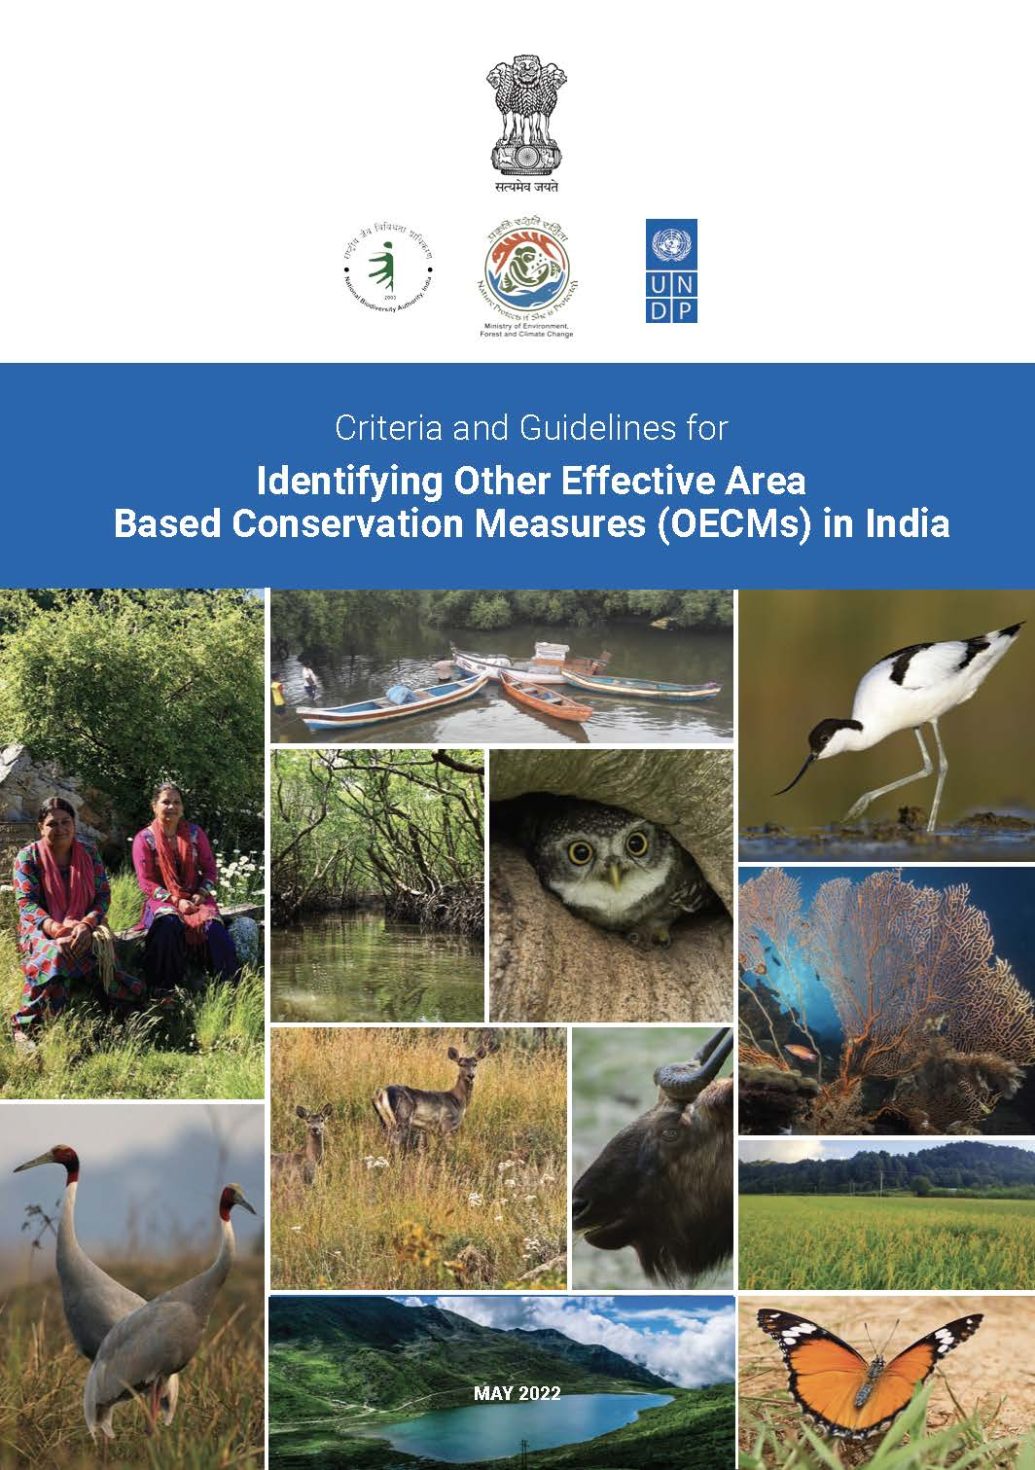 Criteria and Guidelines for Identifying Other Effective Area-Based Conservation Measures (OECMs) in India